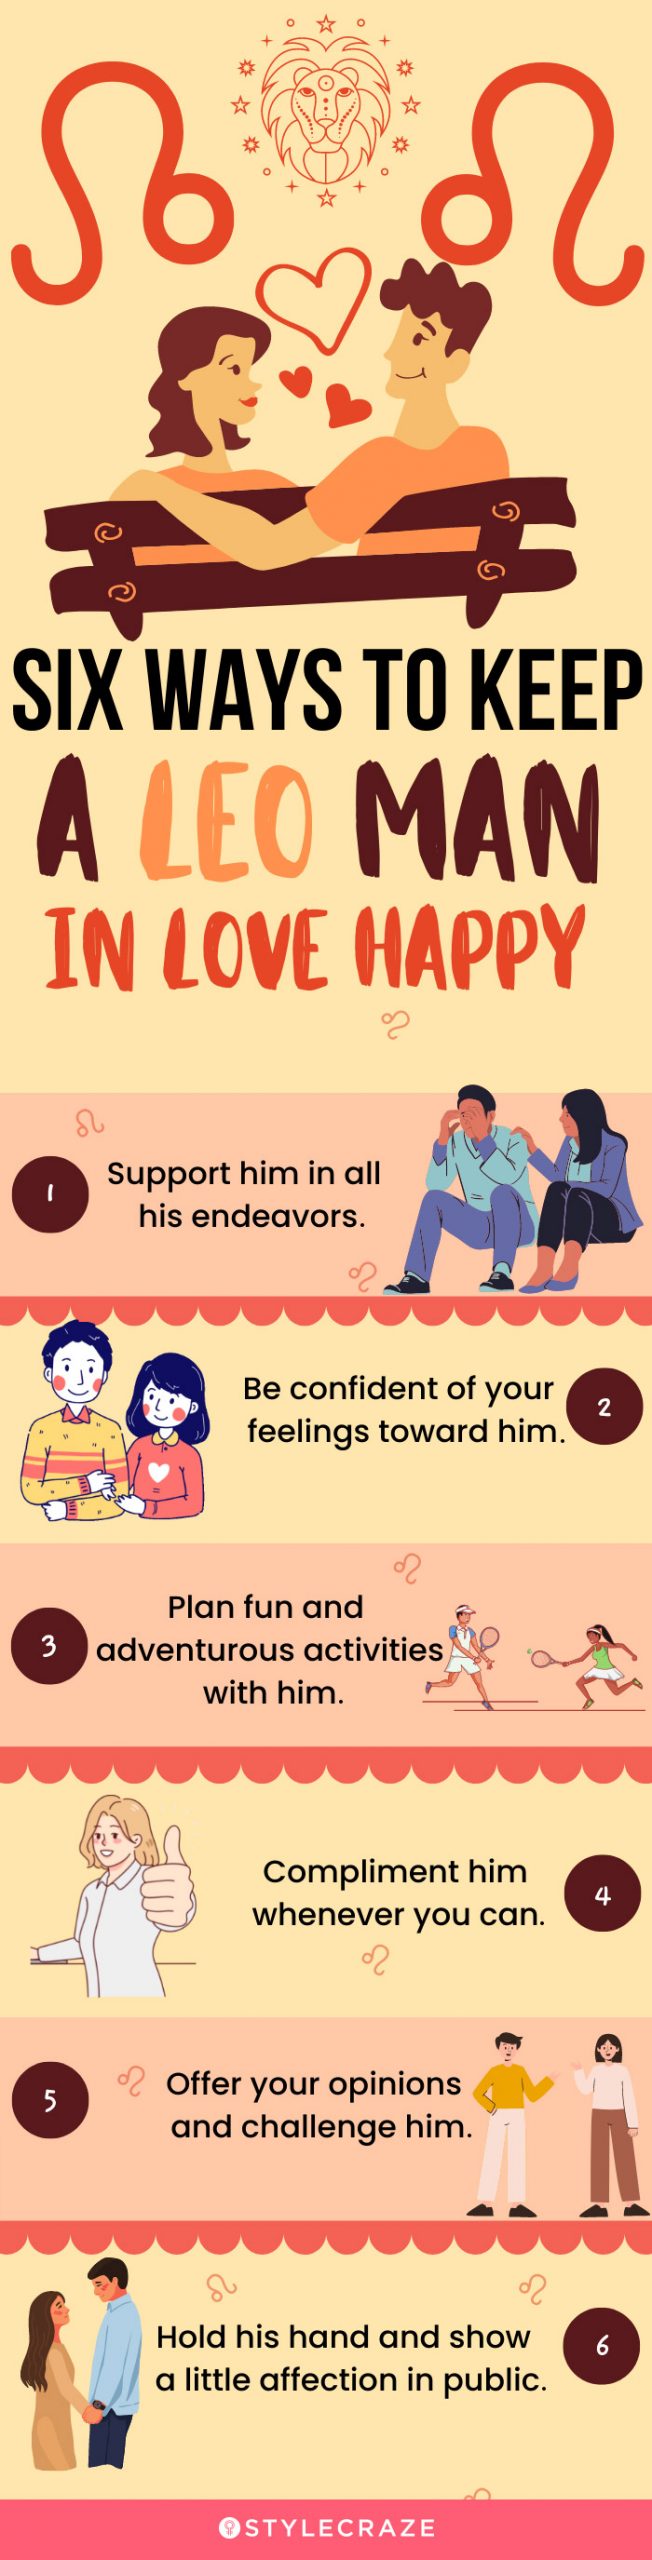 six ways to keep a leo man in love happy (infographic)